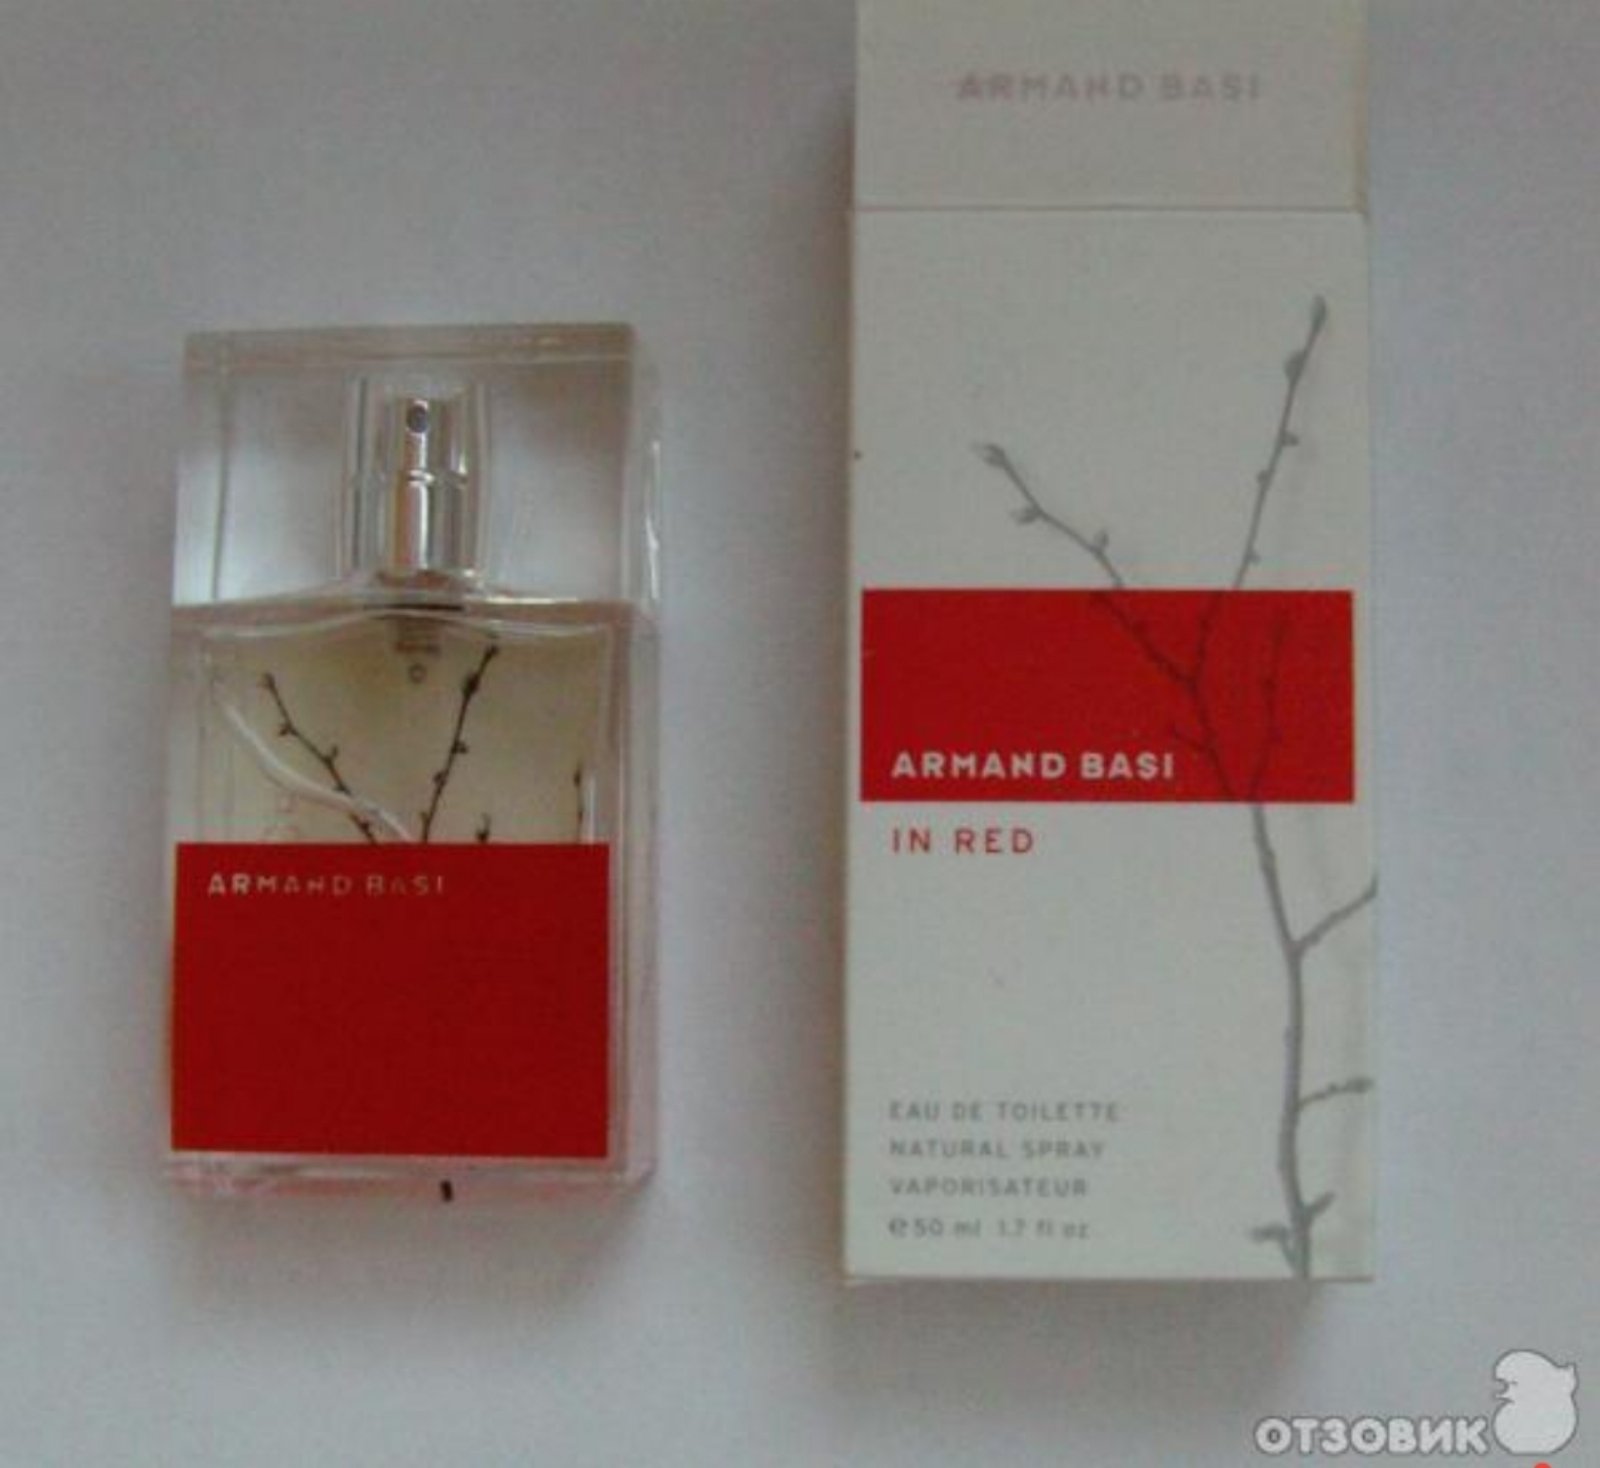 Basi in red отзывы. Armand basi in Red ручка. Armand basi in Red (w) EDT 100 ml. Armand basi Happy in Red 50ml. Armand basi Happy in Red [w] EDT - 50ml.